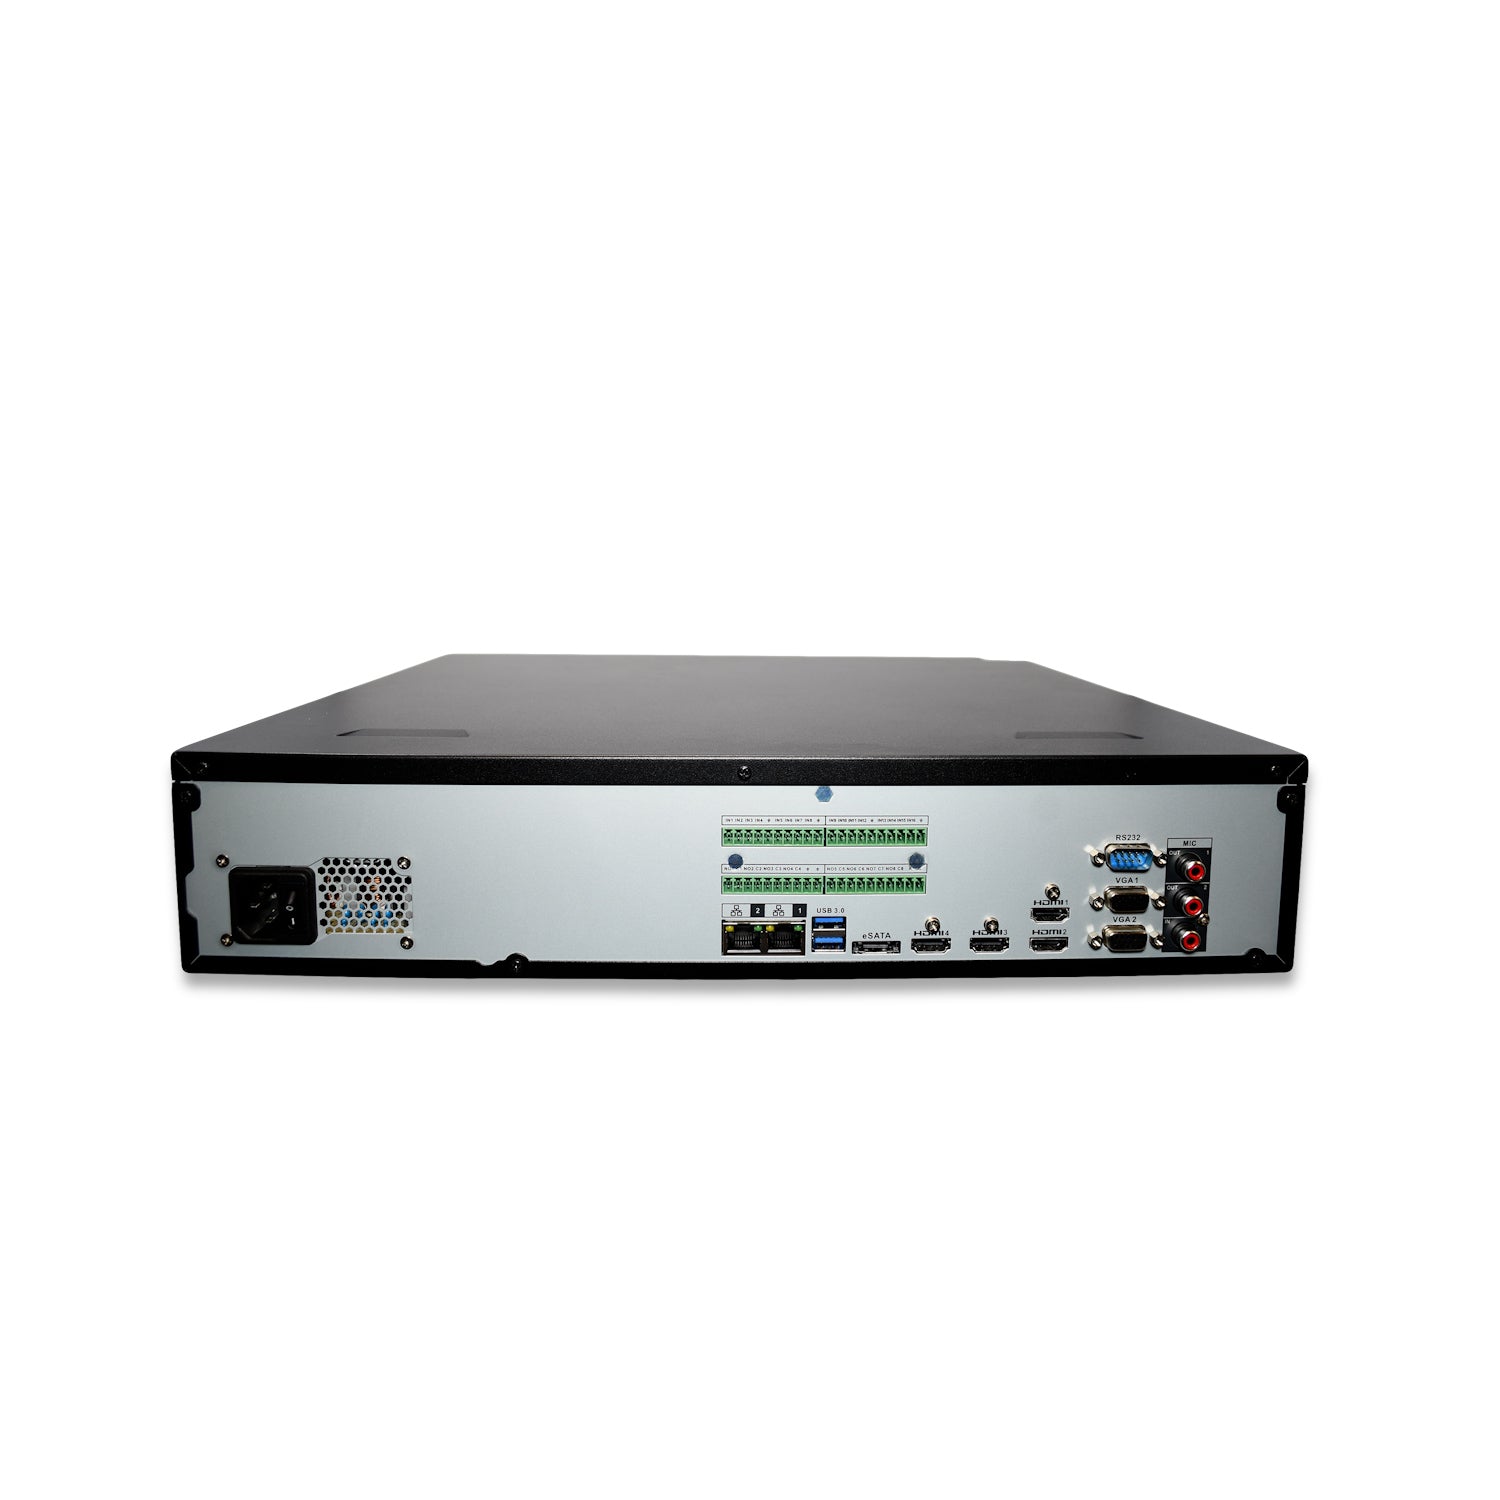 MNR68128-AI | 128 Channel 4K H.265+ Ultra-AI NVR with 160TB (8x20TB) HDD Max Internal Capacity, eSATA Expandable - HDDs Not Included - Montavue